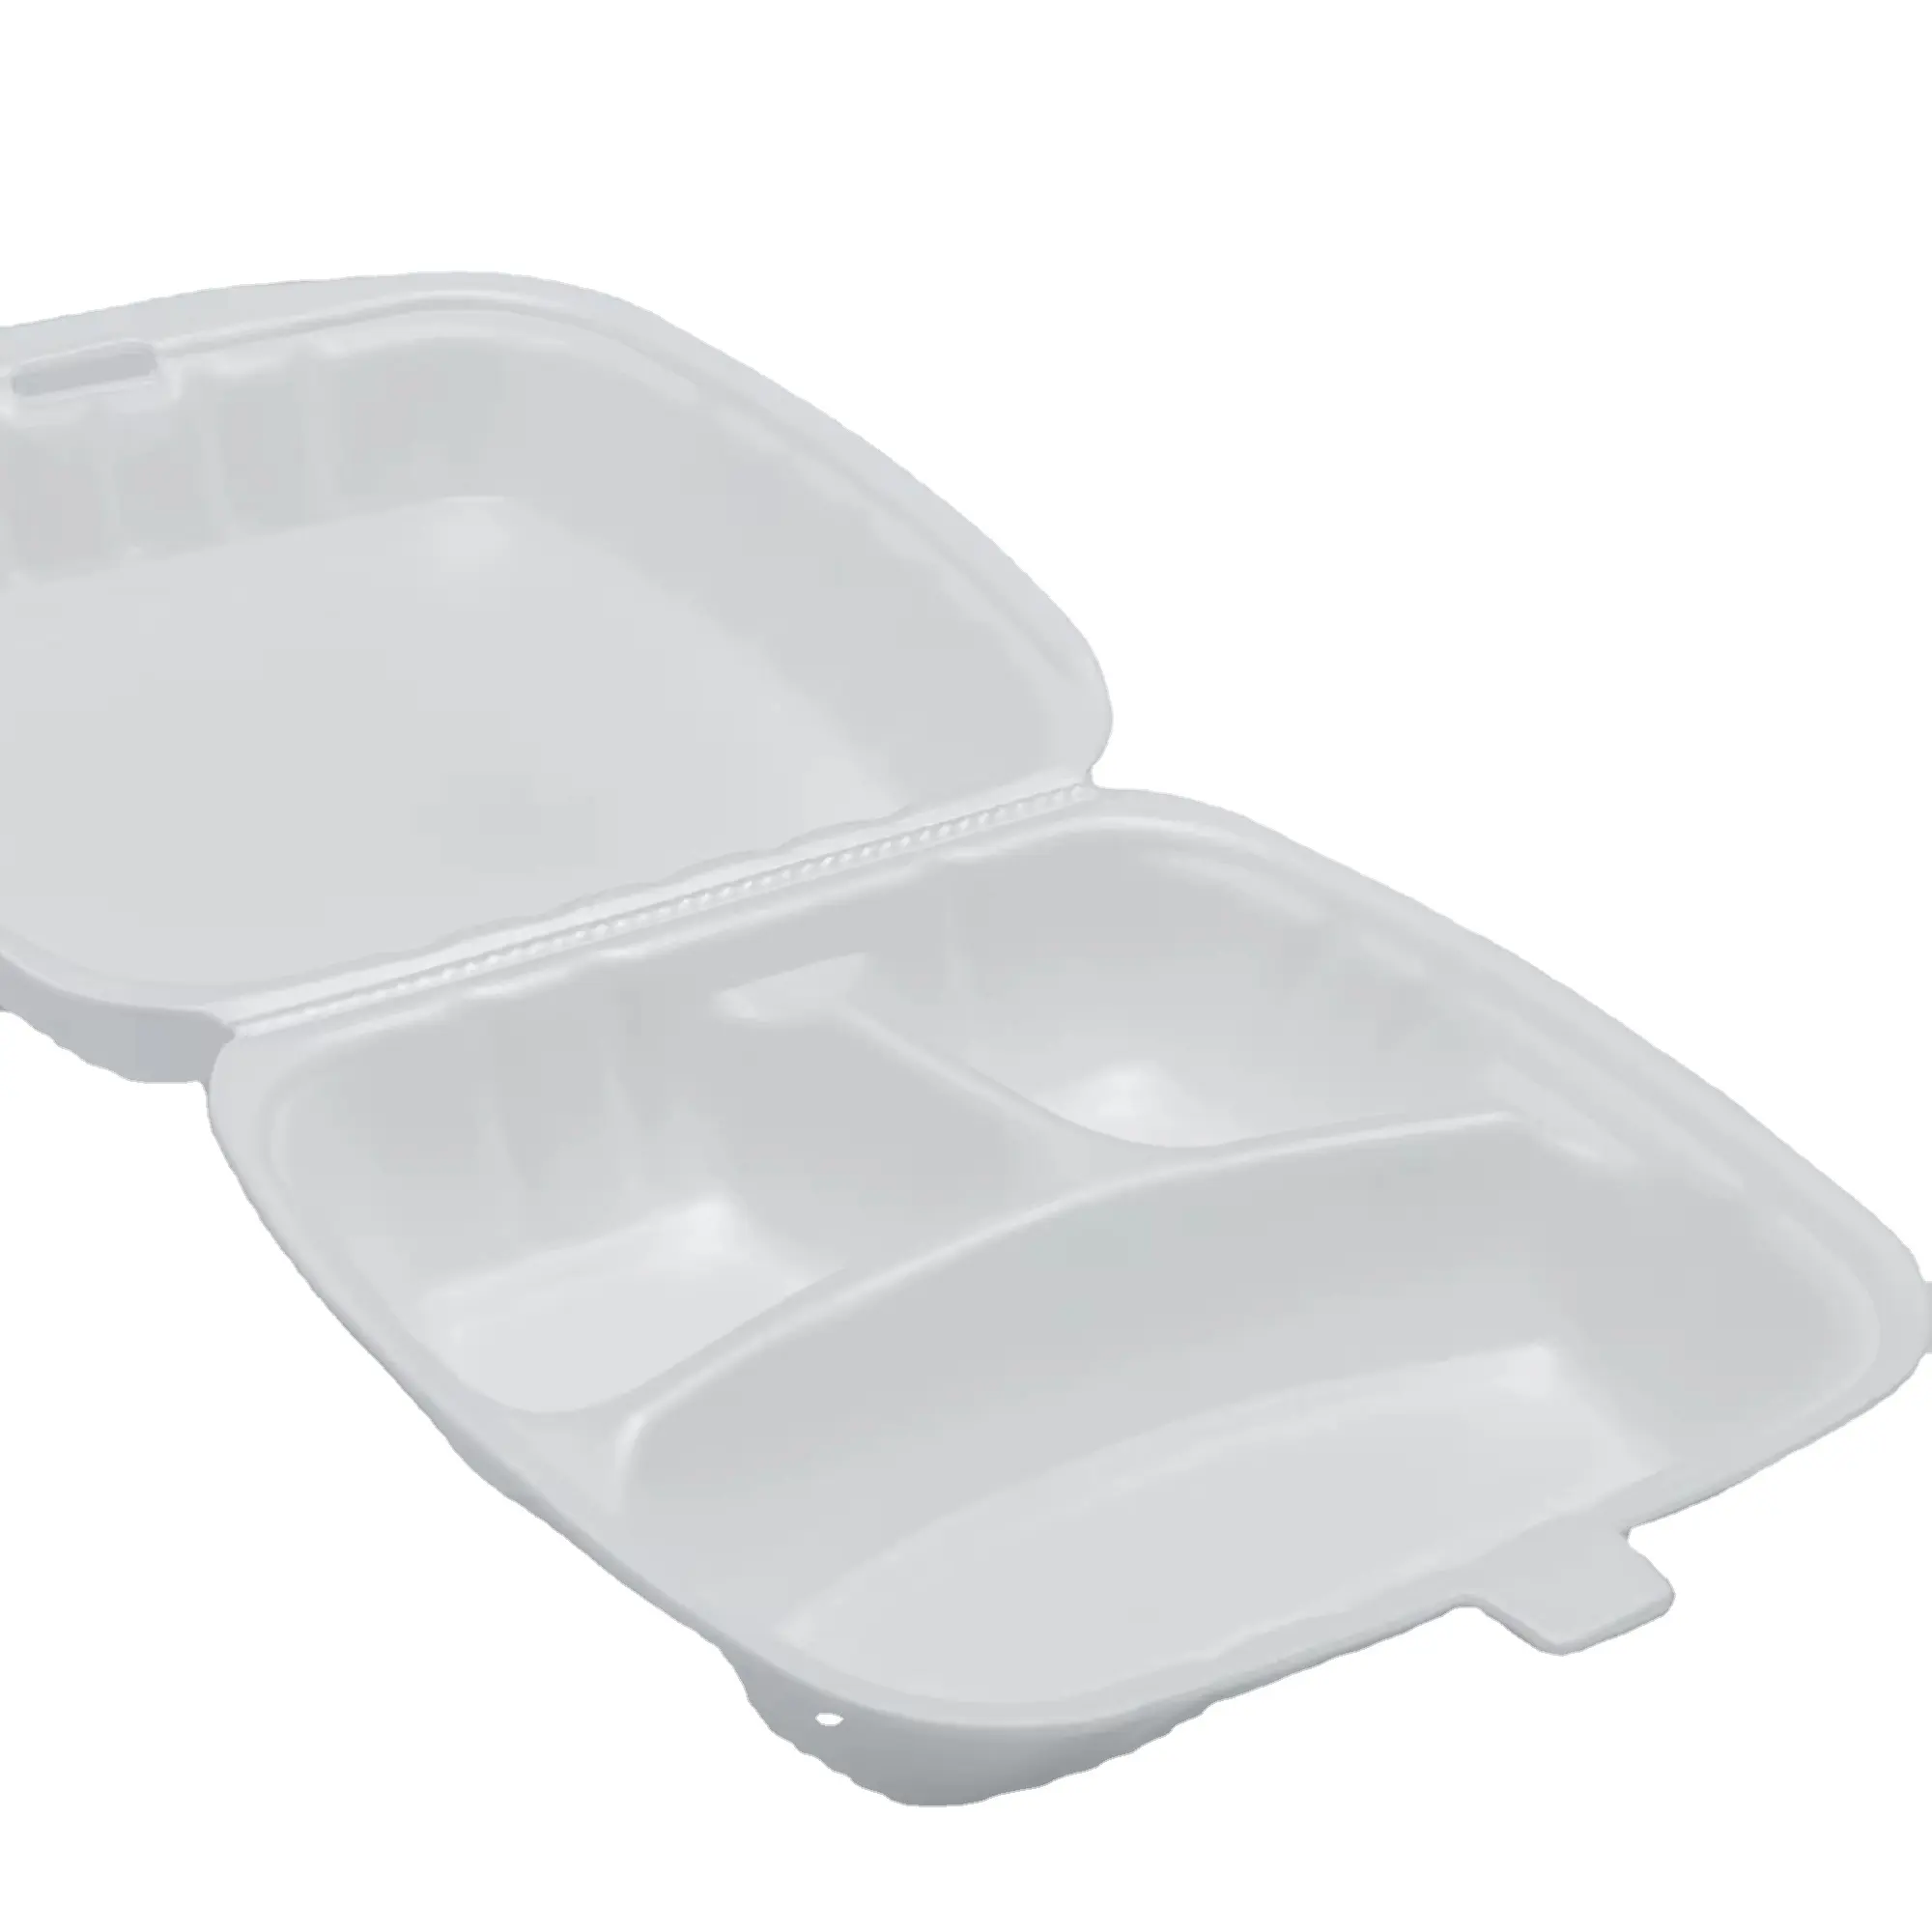 Ready to ship Disposable PS Foam Food Container Take Away lunch Box white color Low Price 11 Years Manufacturer